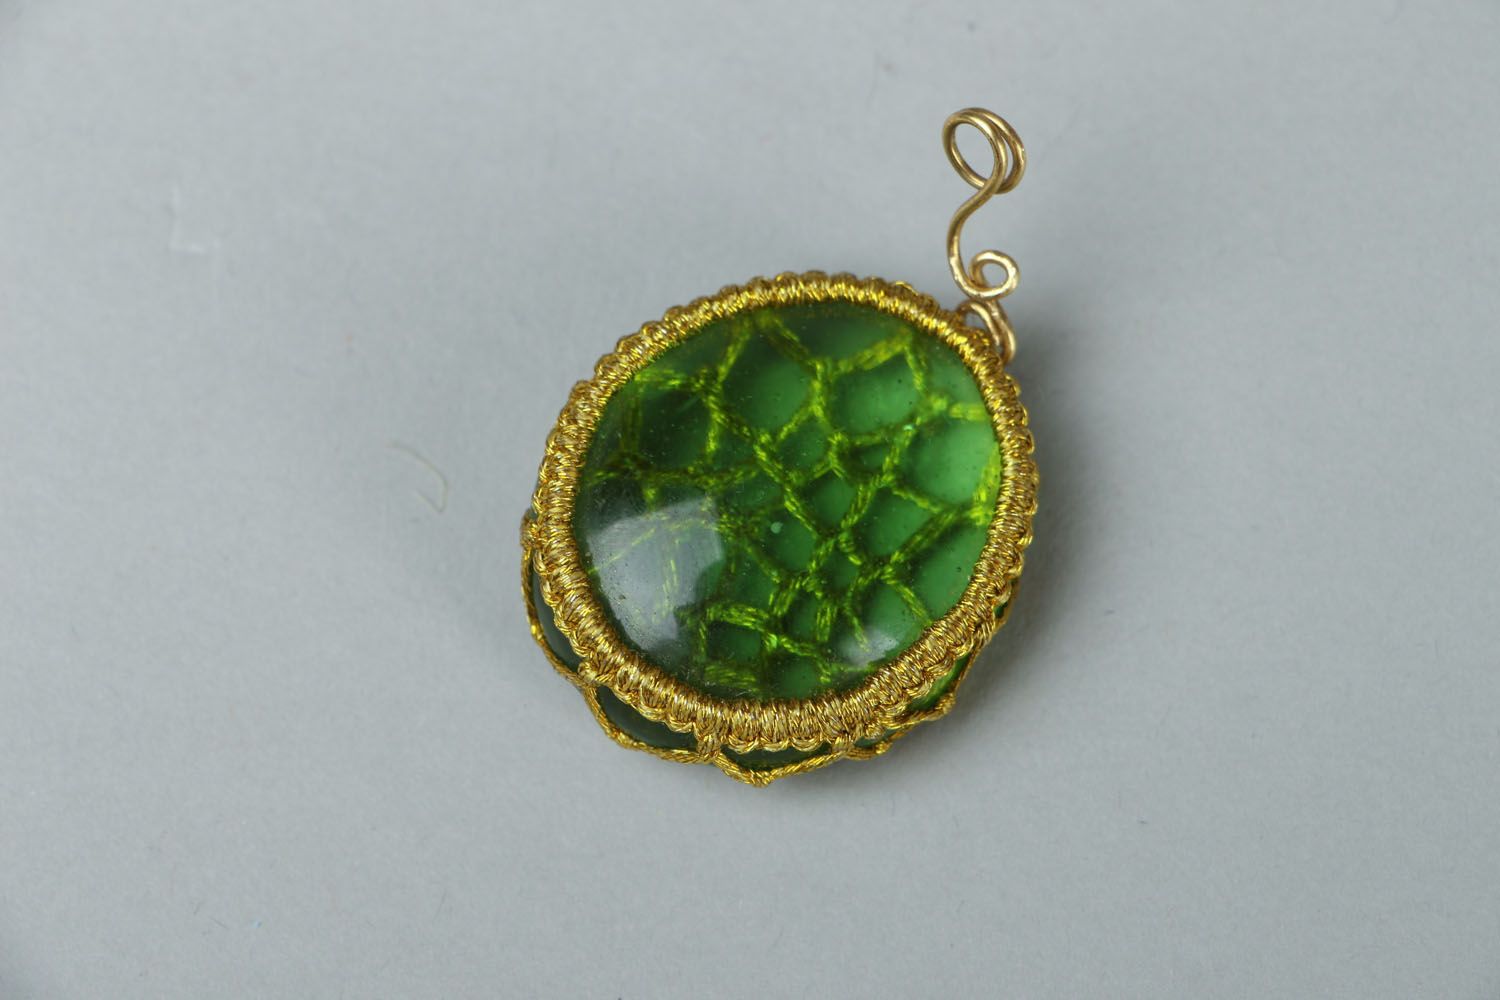 Pendant made of glass and thread photo 1